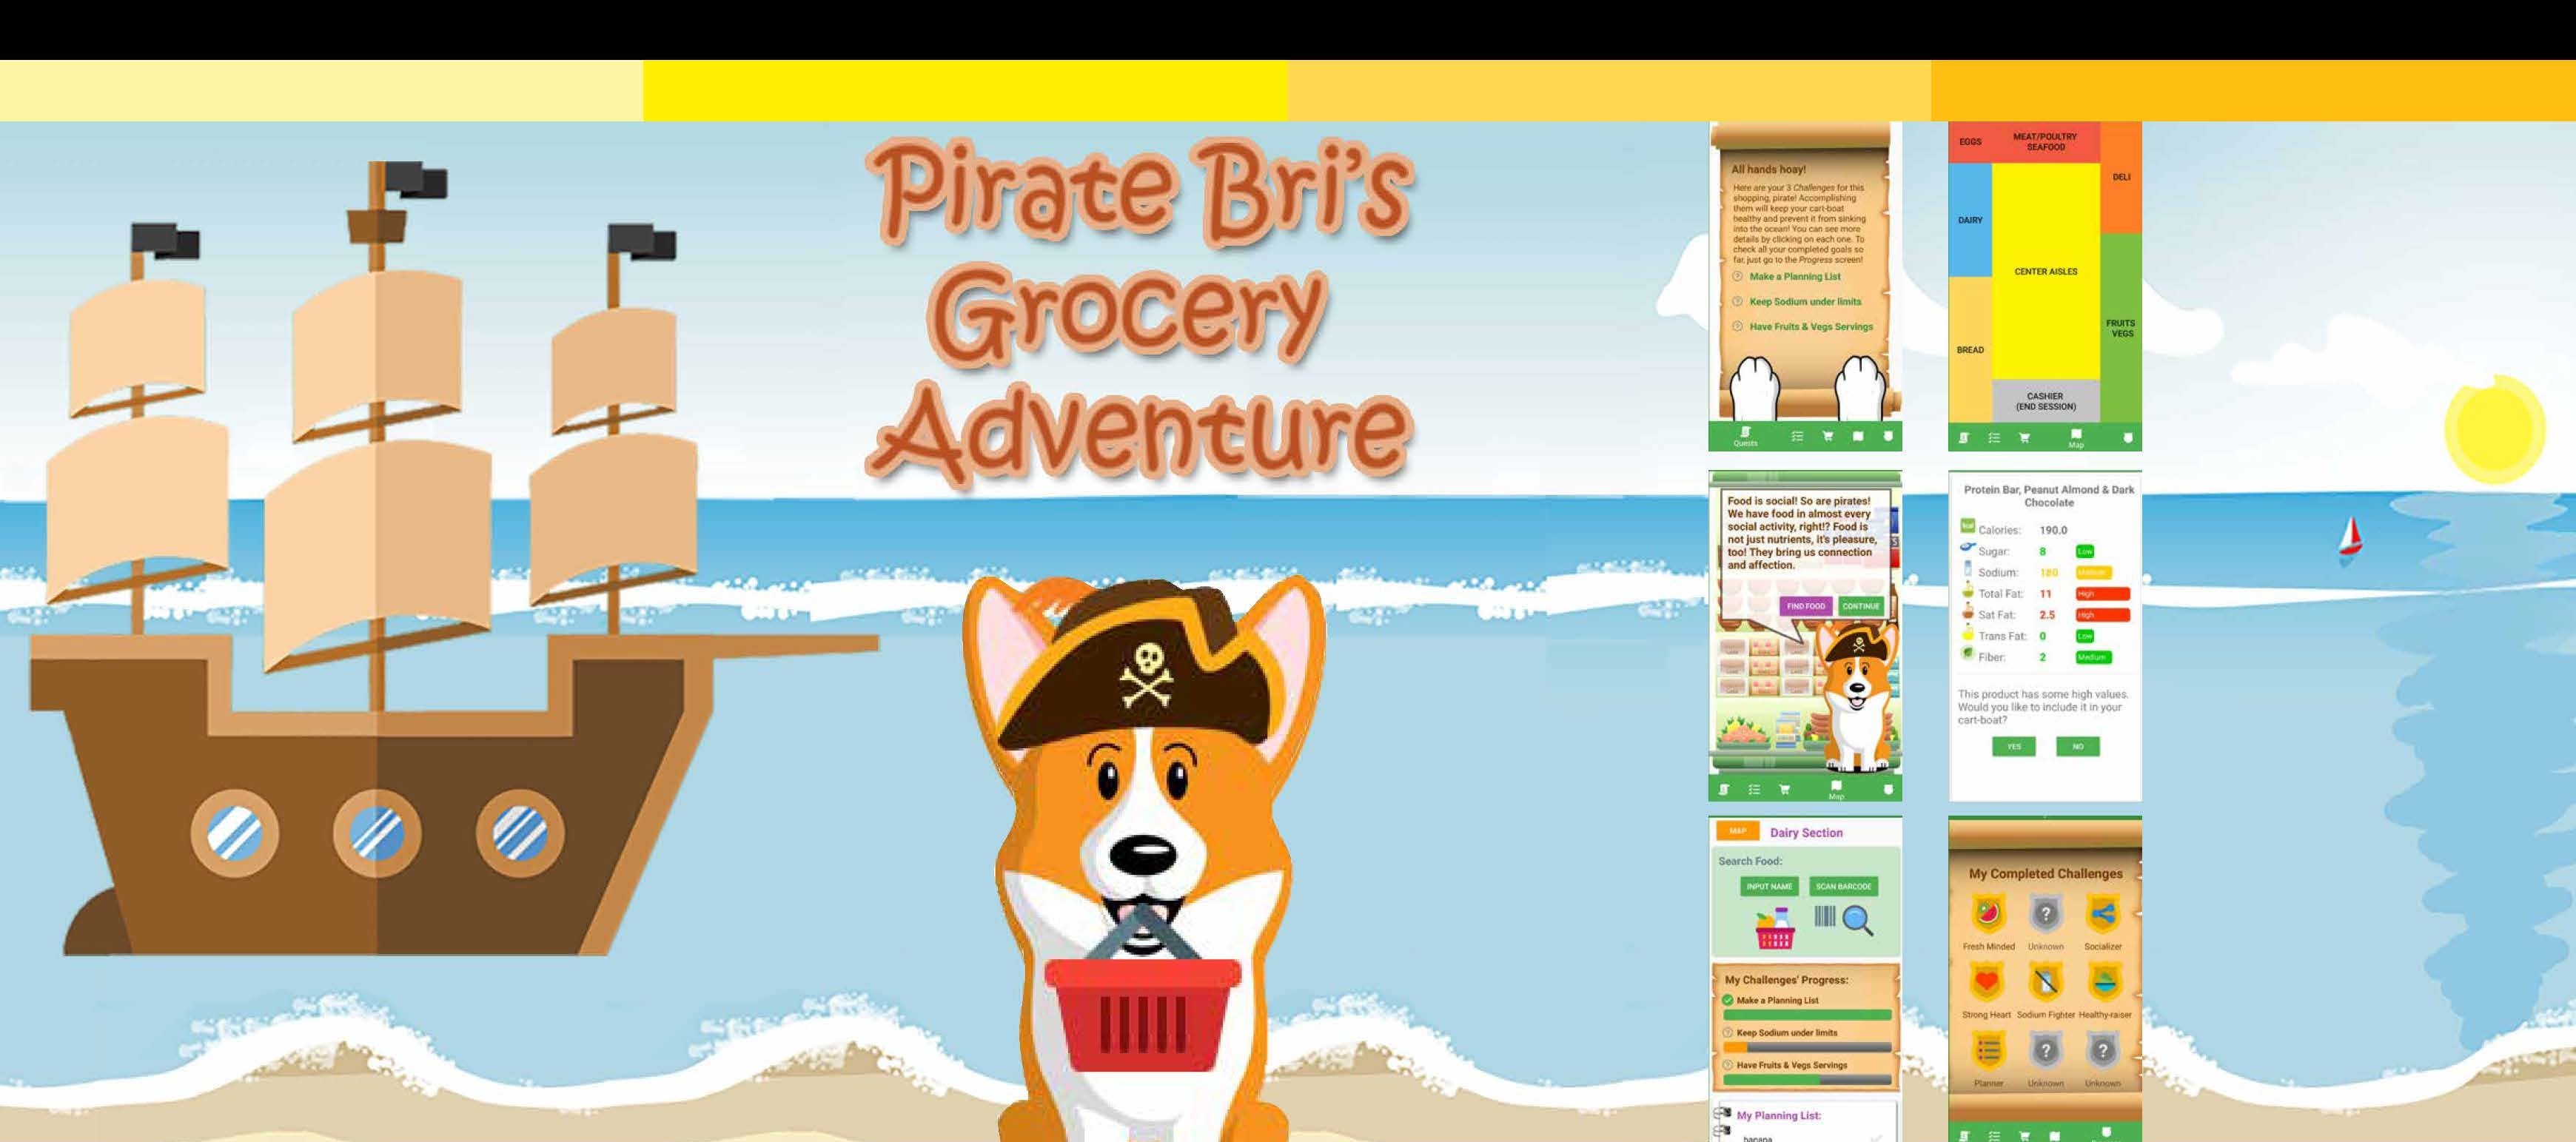 Pirate Bri's Grocery Adventure poster title; pirate corgi on beach with ship and game demo in the background